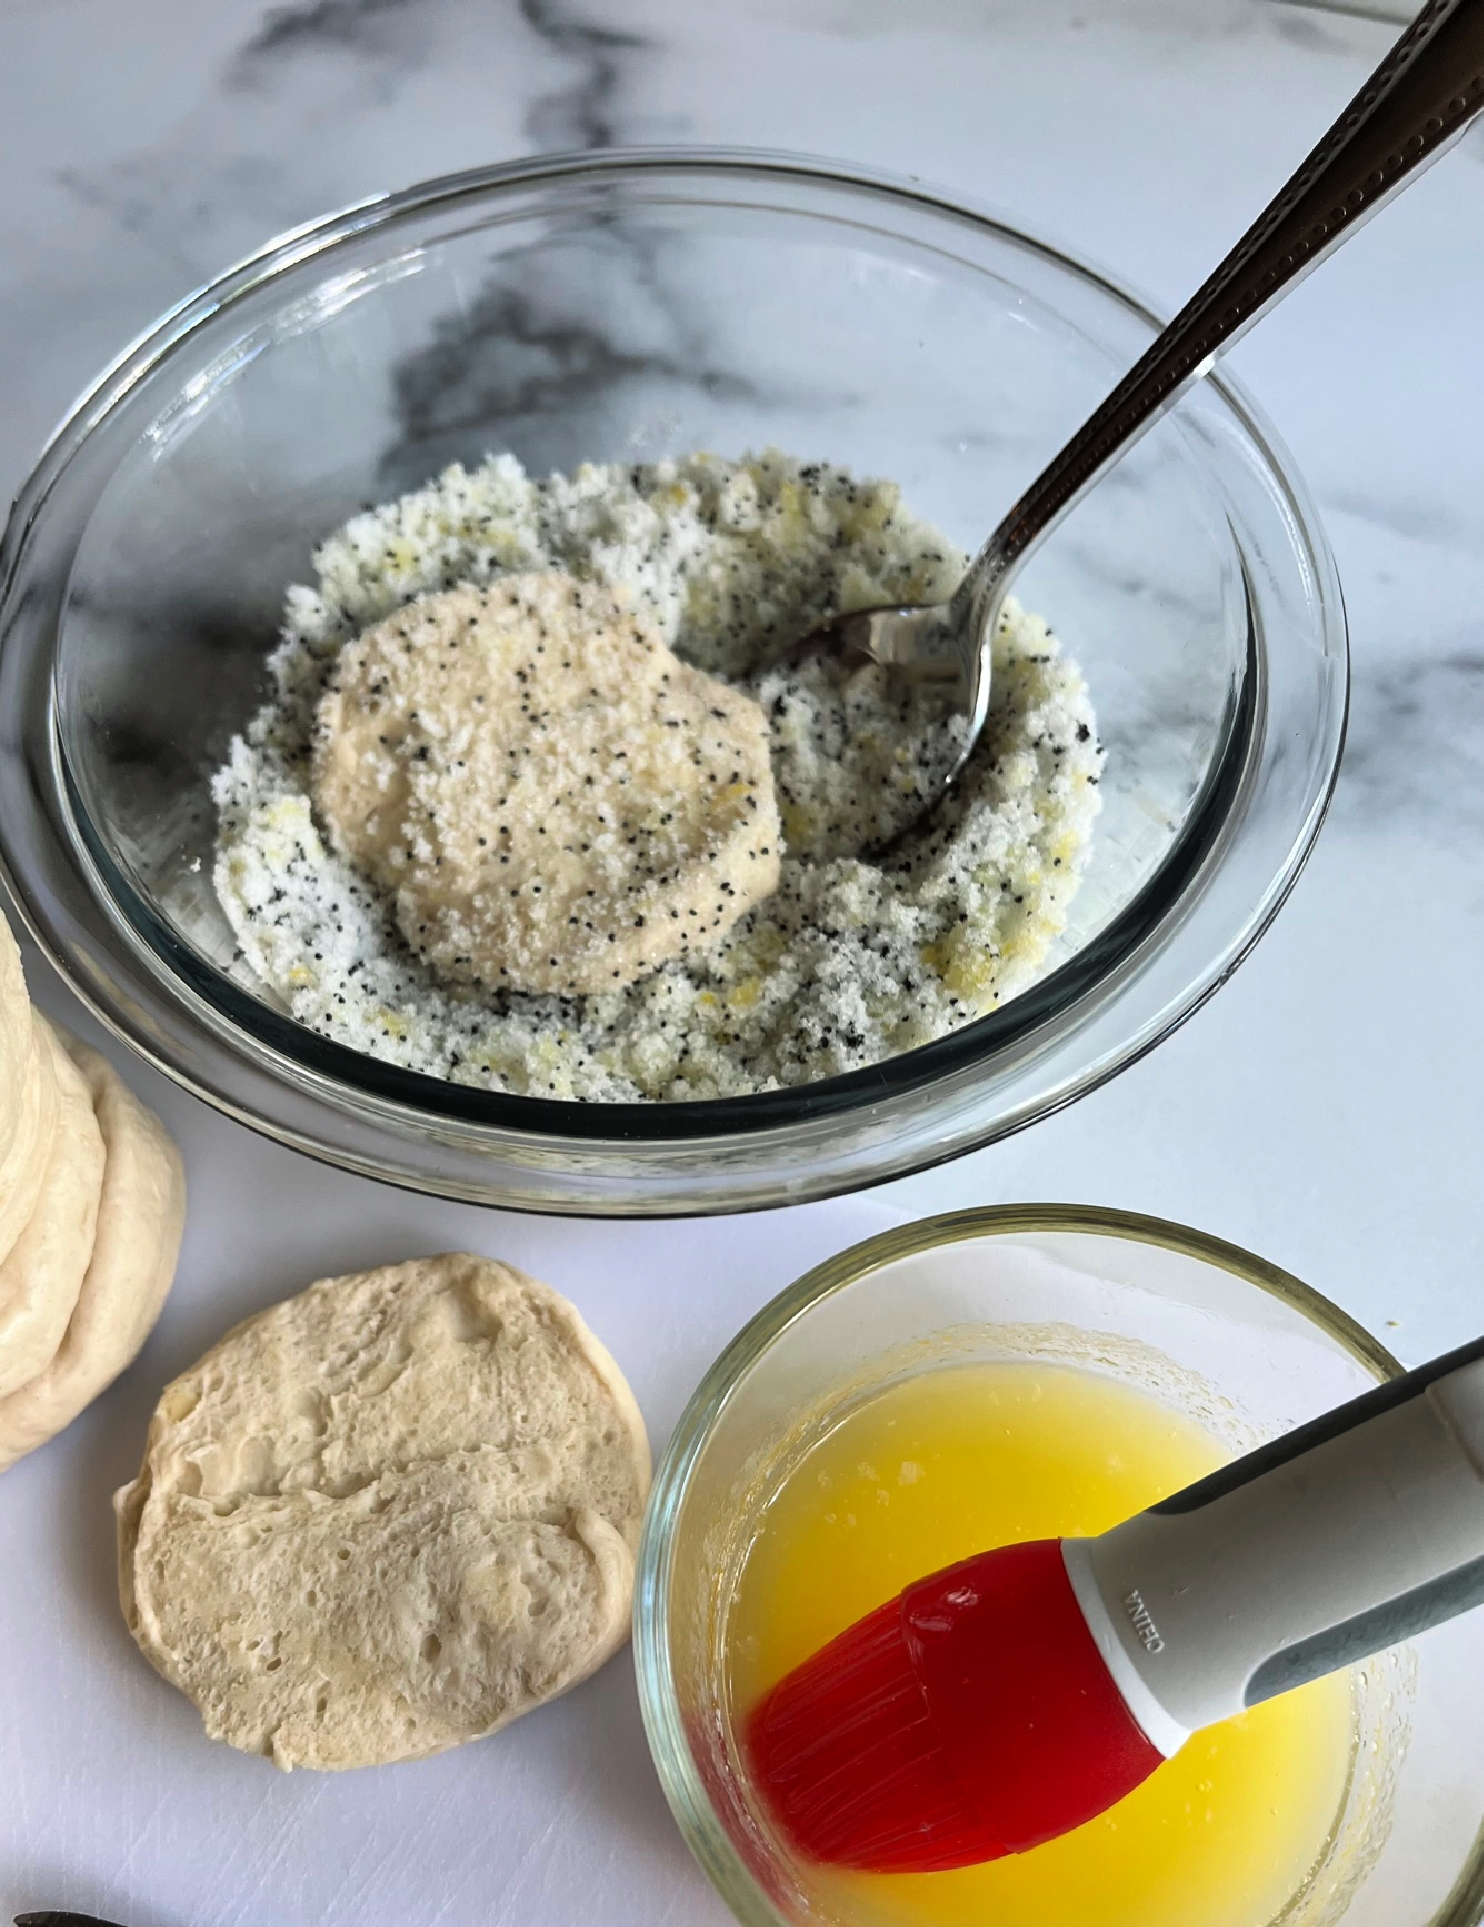 This photo shows a small bowl of melted butter with a brush, a biscuit next to it and a biscuit being coated in the sugar lemon poppy seed mixture in a small clear glass mixing bowl. 